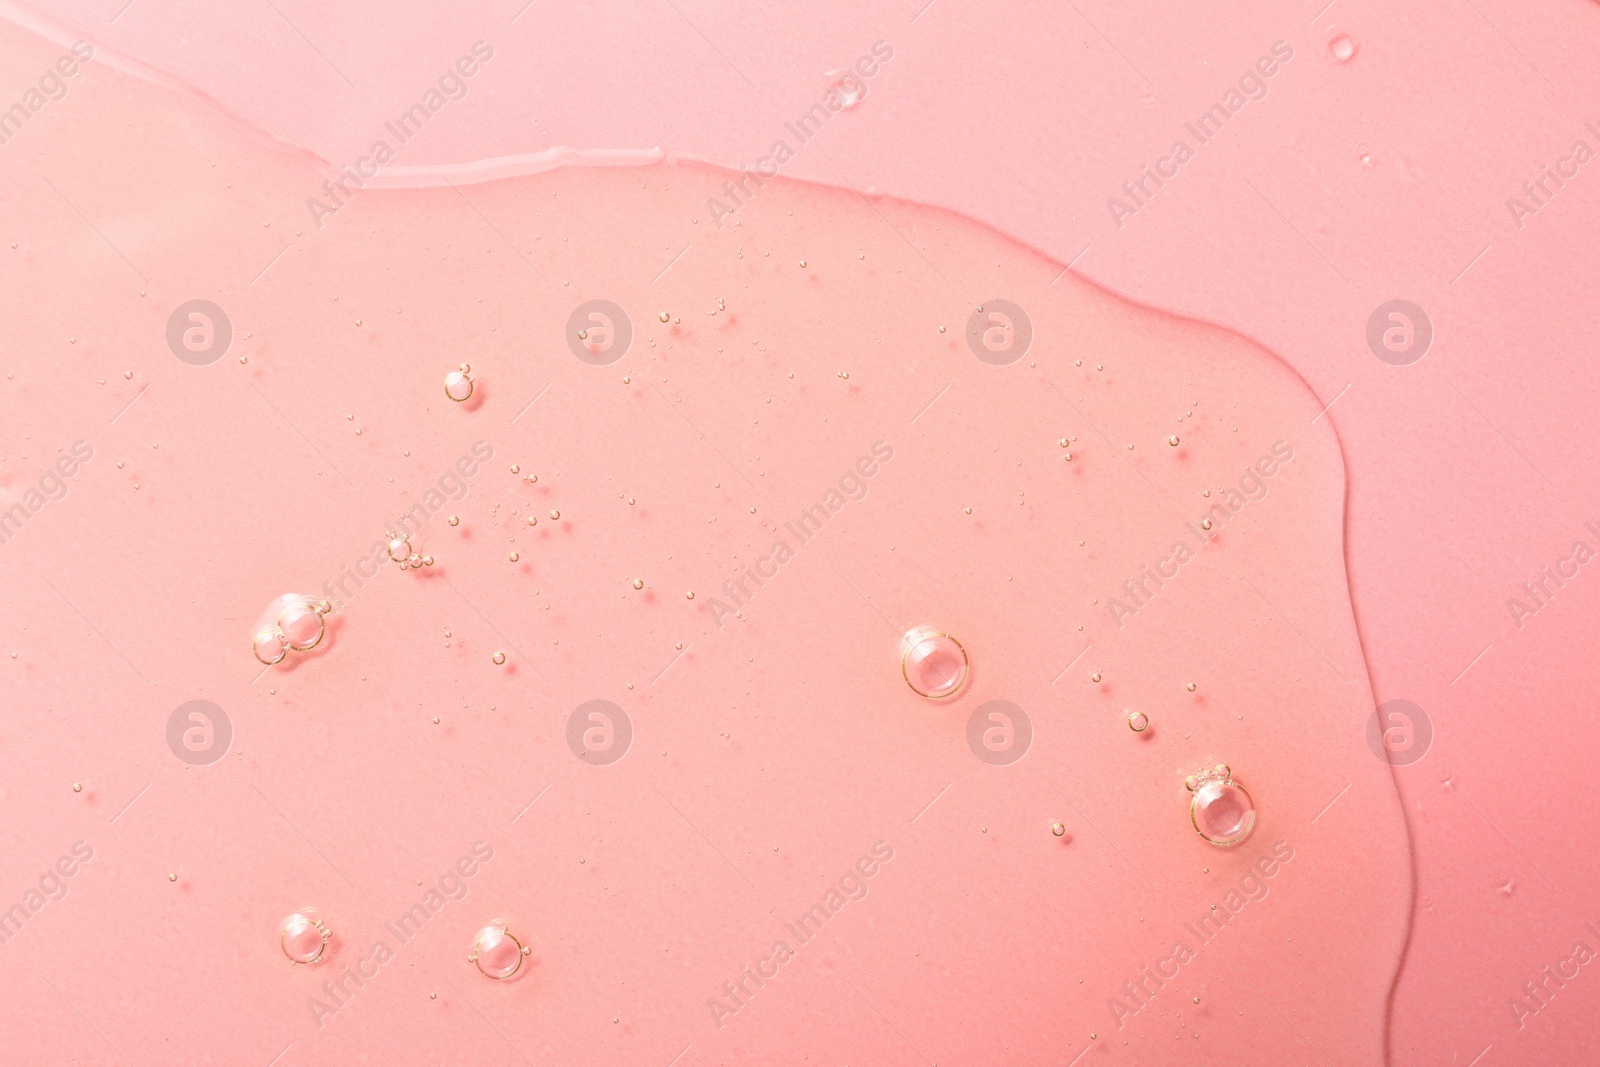 Photo of Sample of hydrophilic oil on pink background, top view